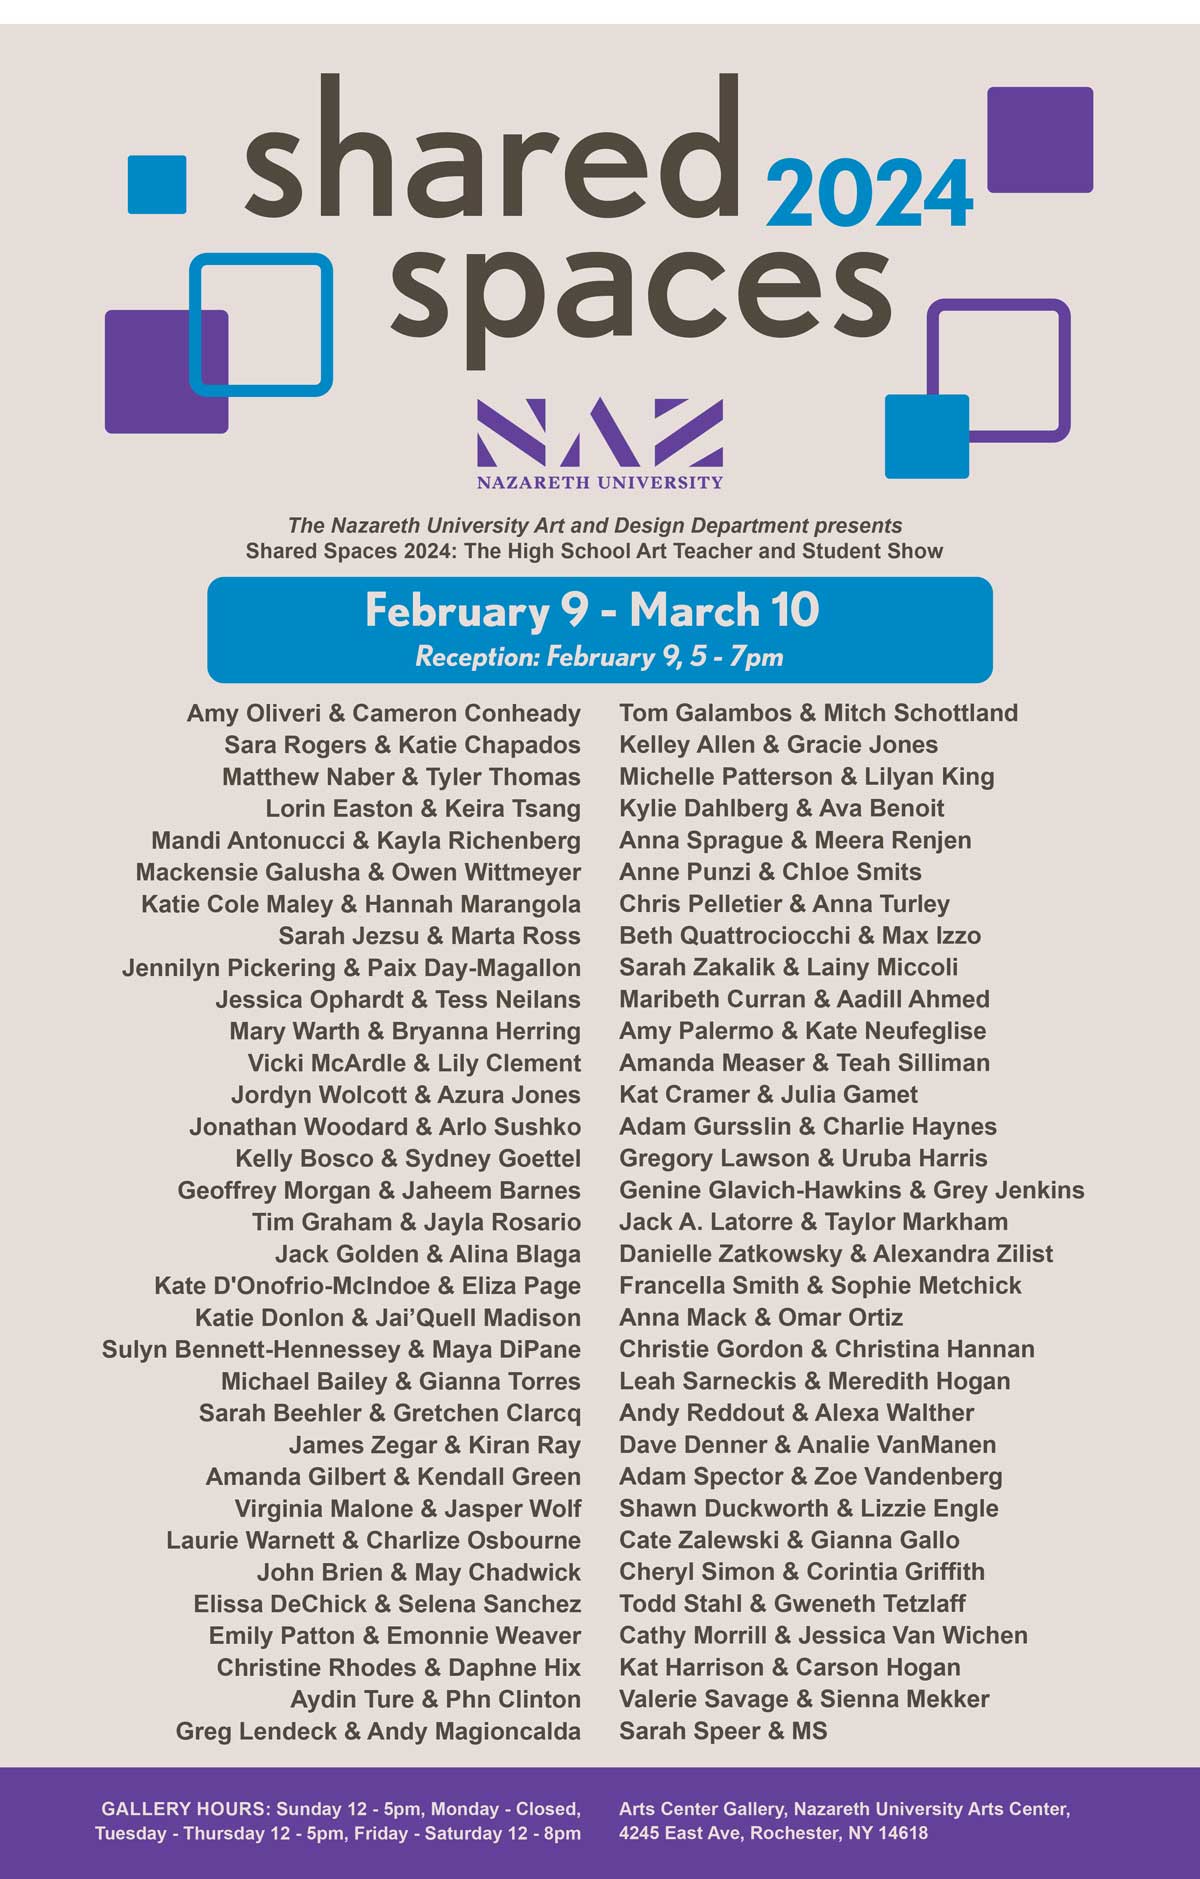 Shared Spaces poster, listing dozens of pairs of participants